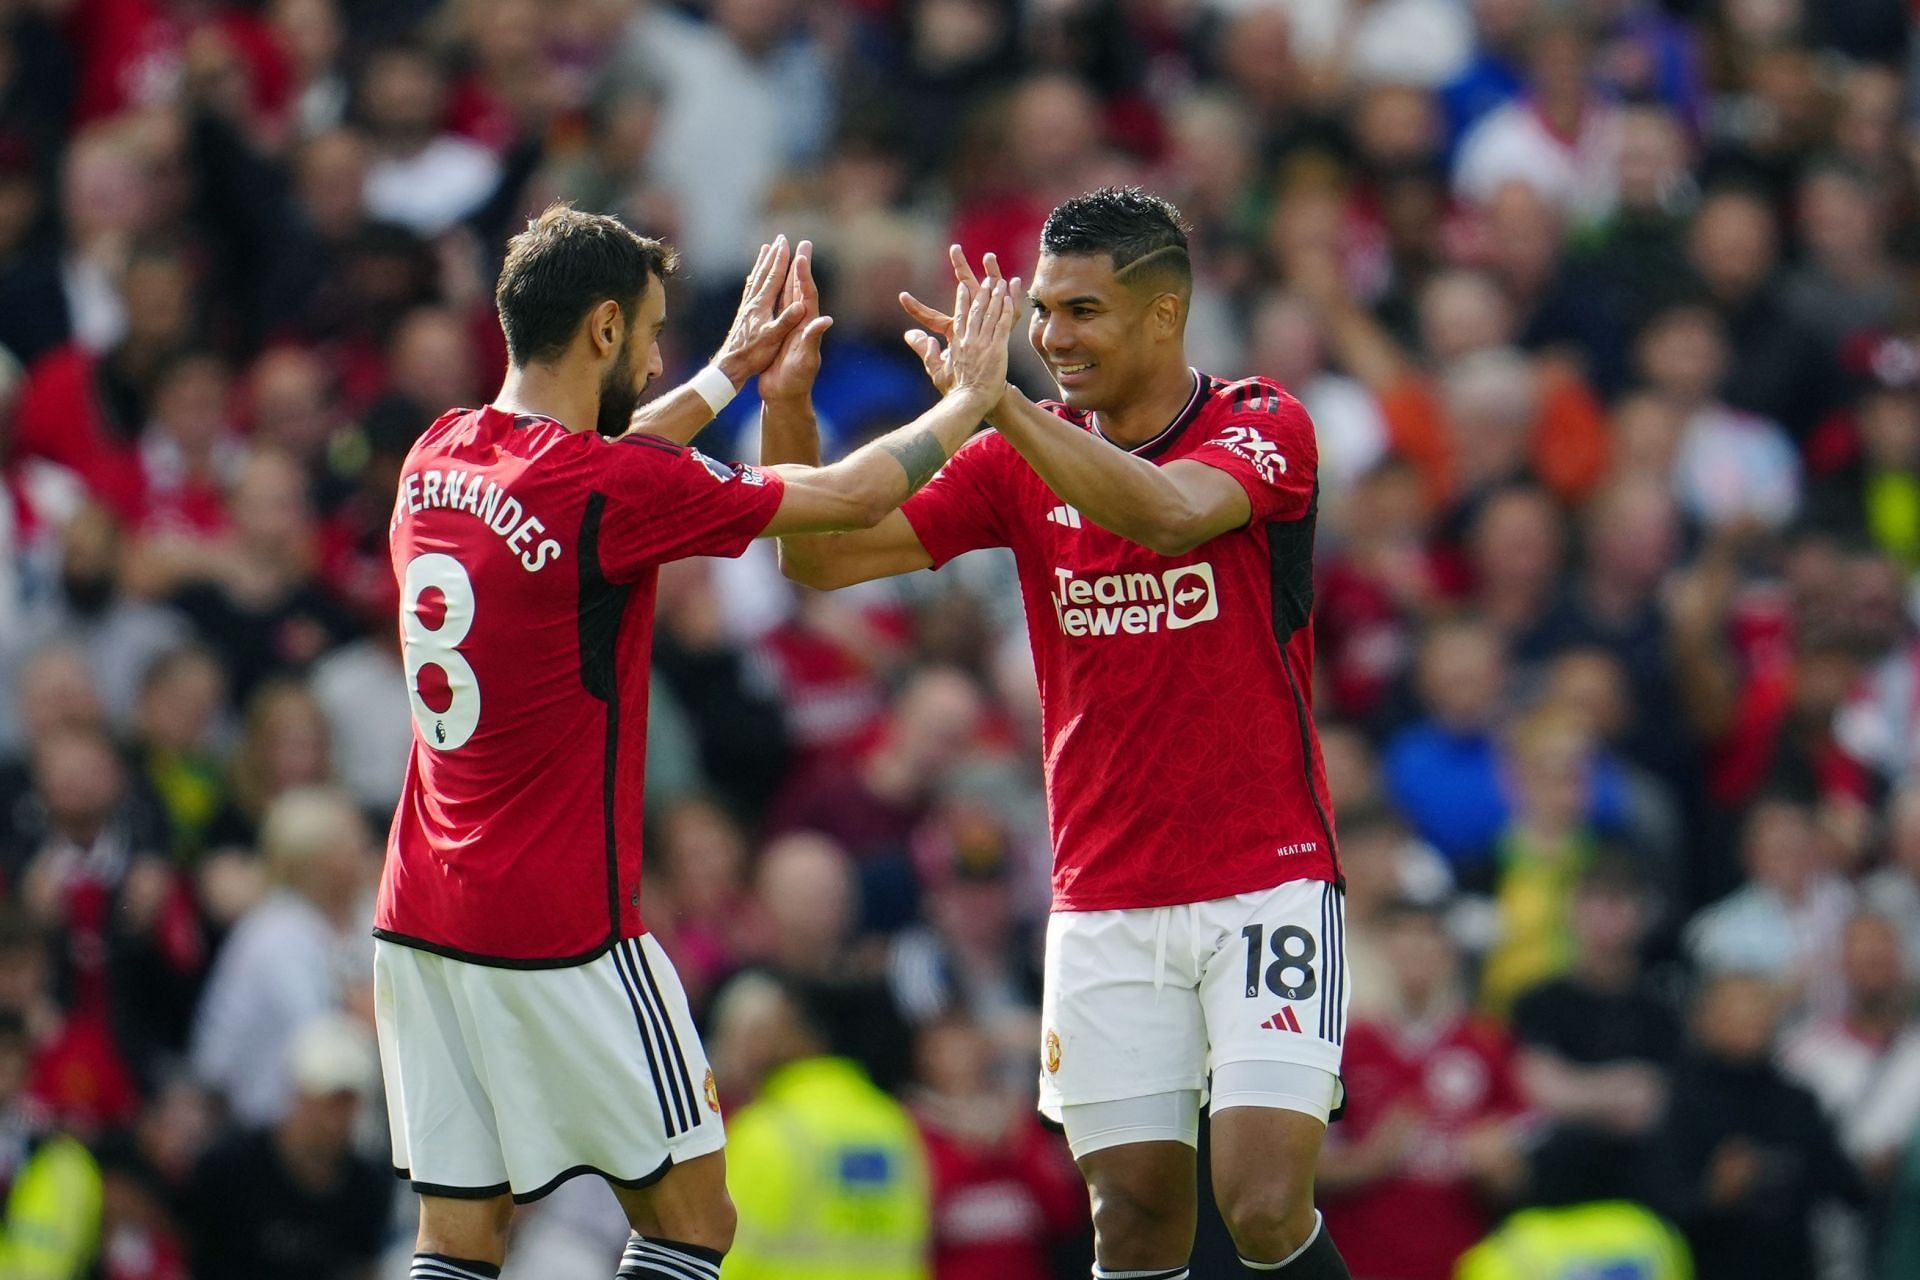 Manchester United secured a 3-2 win over Forest in the Premier League.